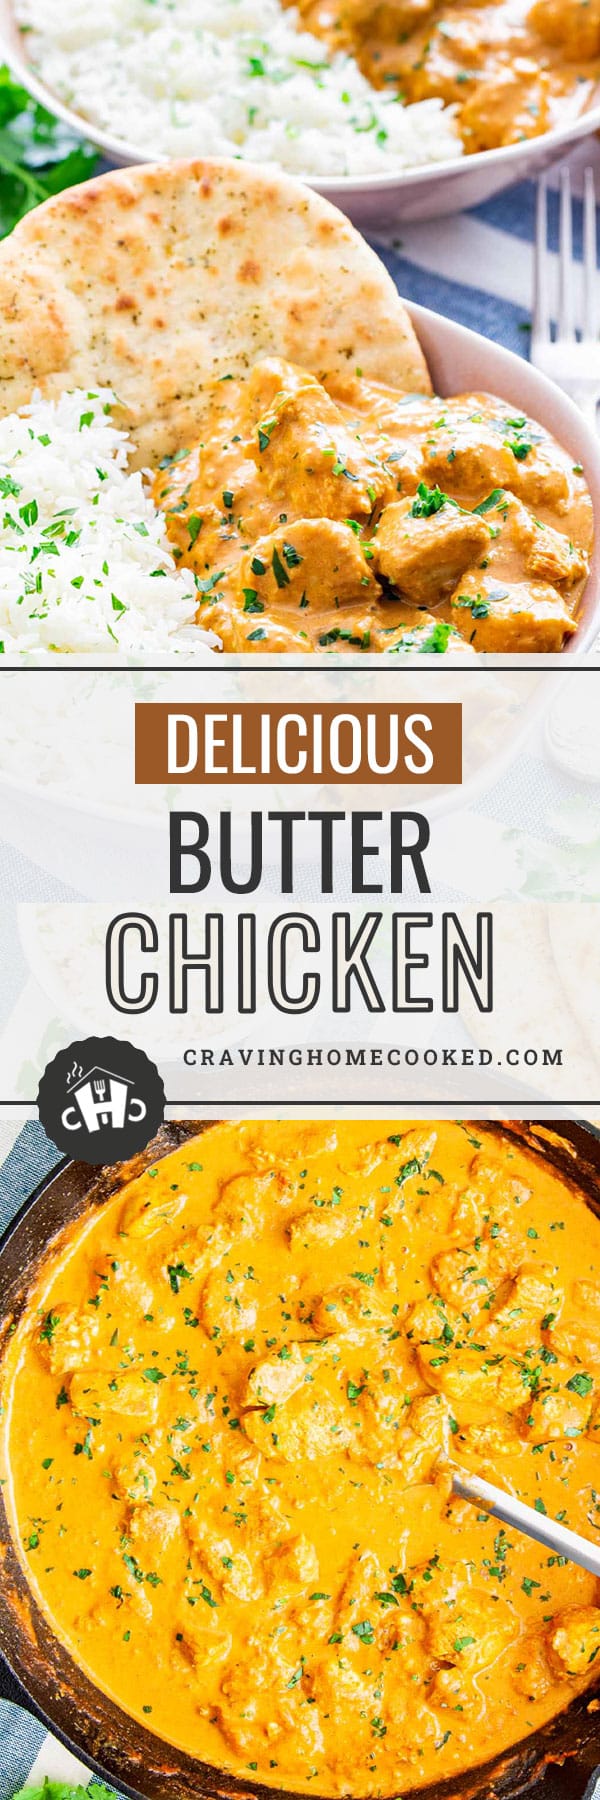 Butter Chicken - Craving Home Cooked